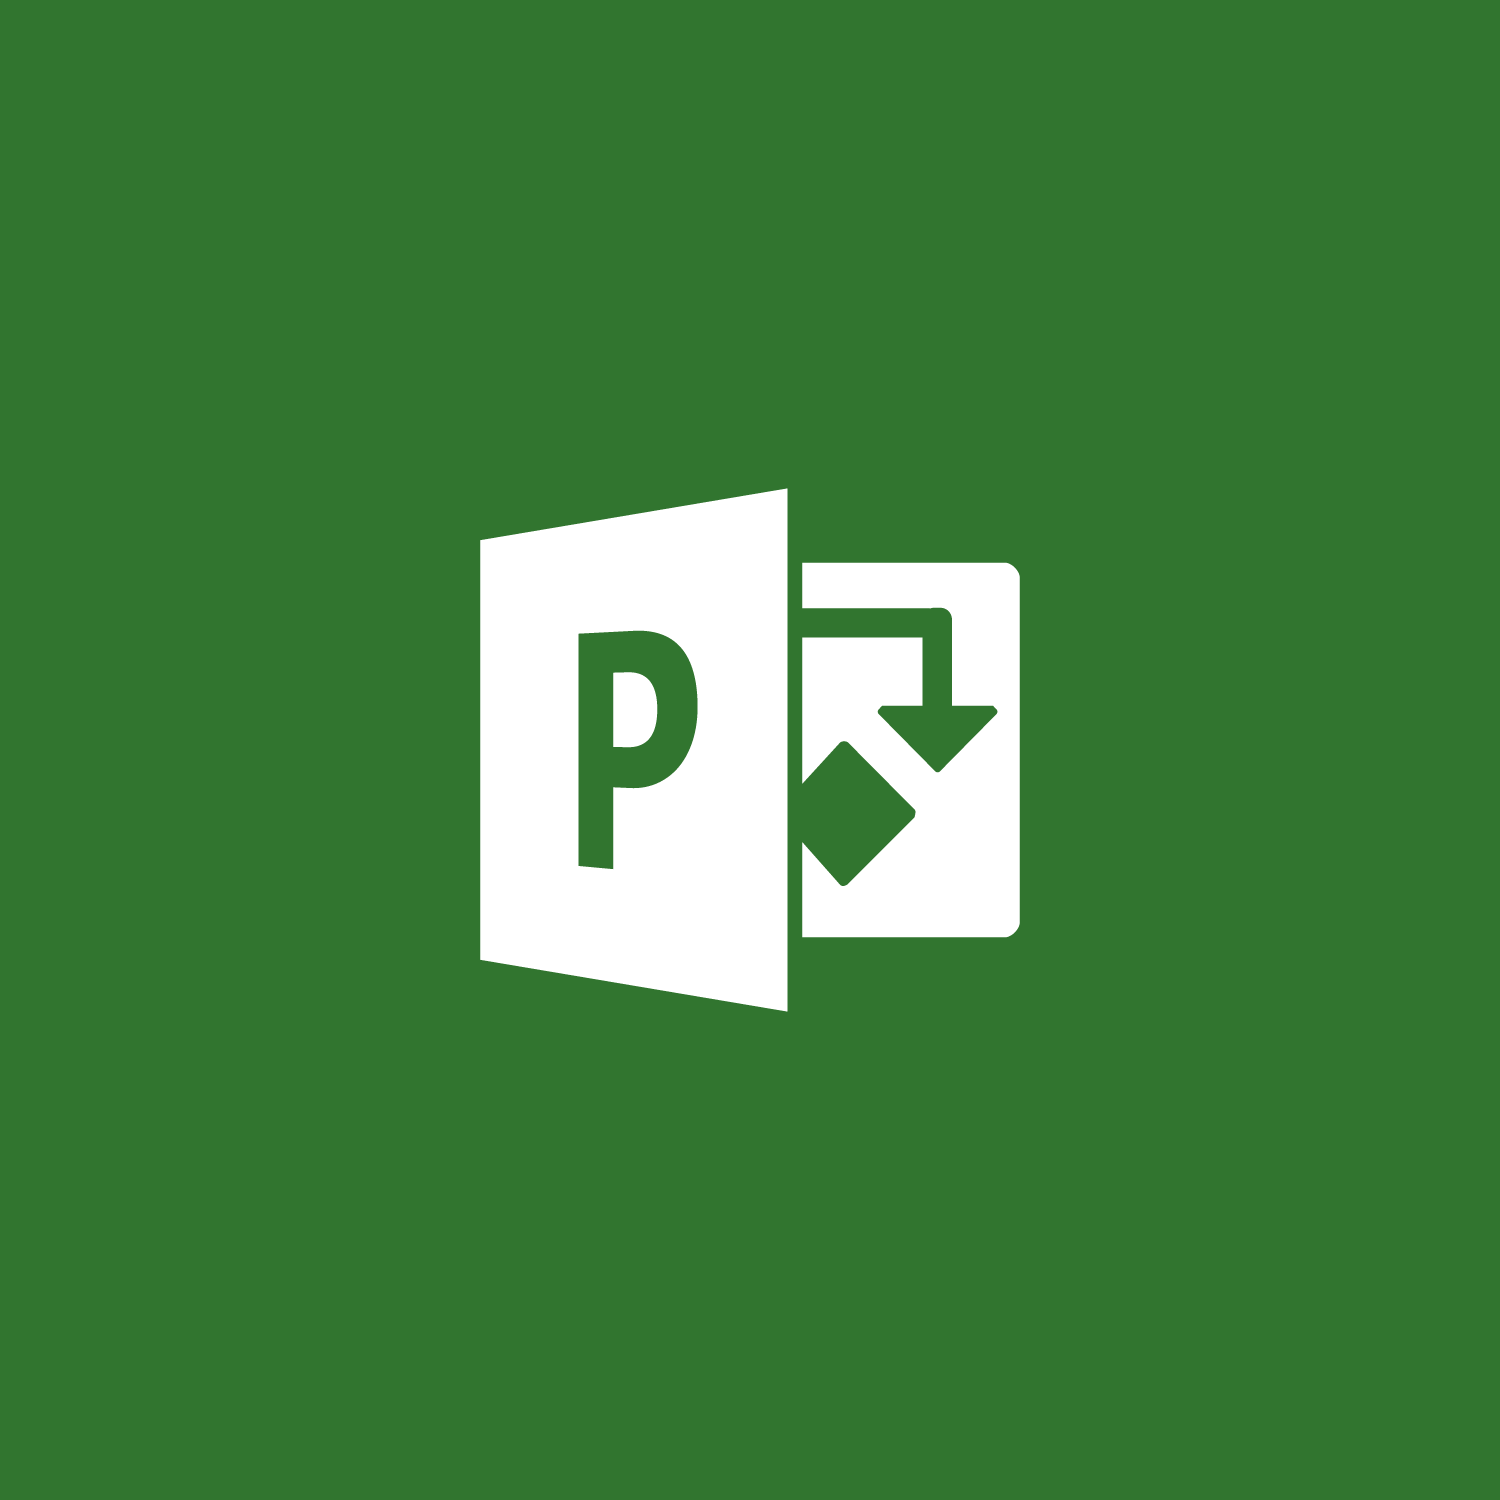 Microsoft Project product key download